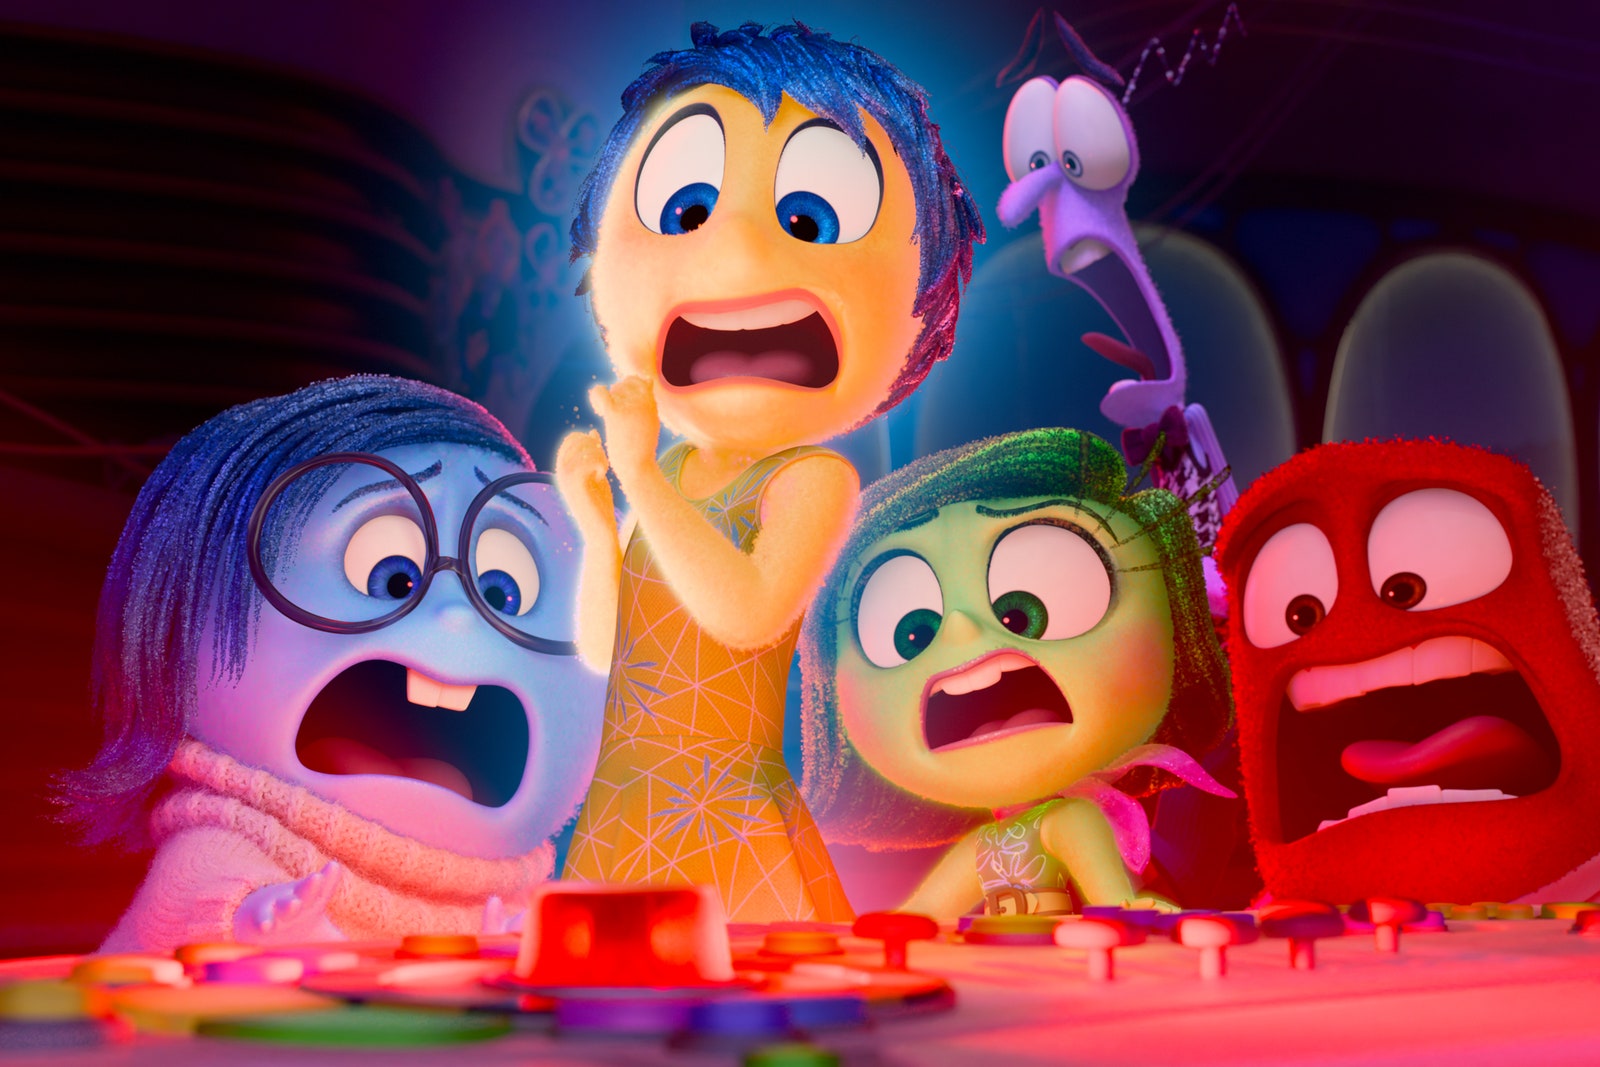 Pixar Put an Easter Egg for Its Next Movie in Inside Out 2. Did You Catch It?